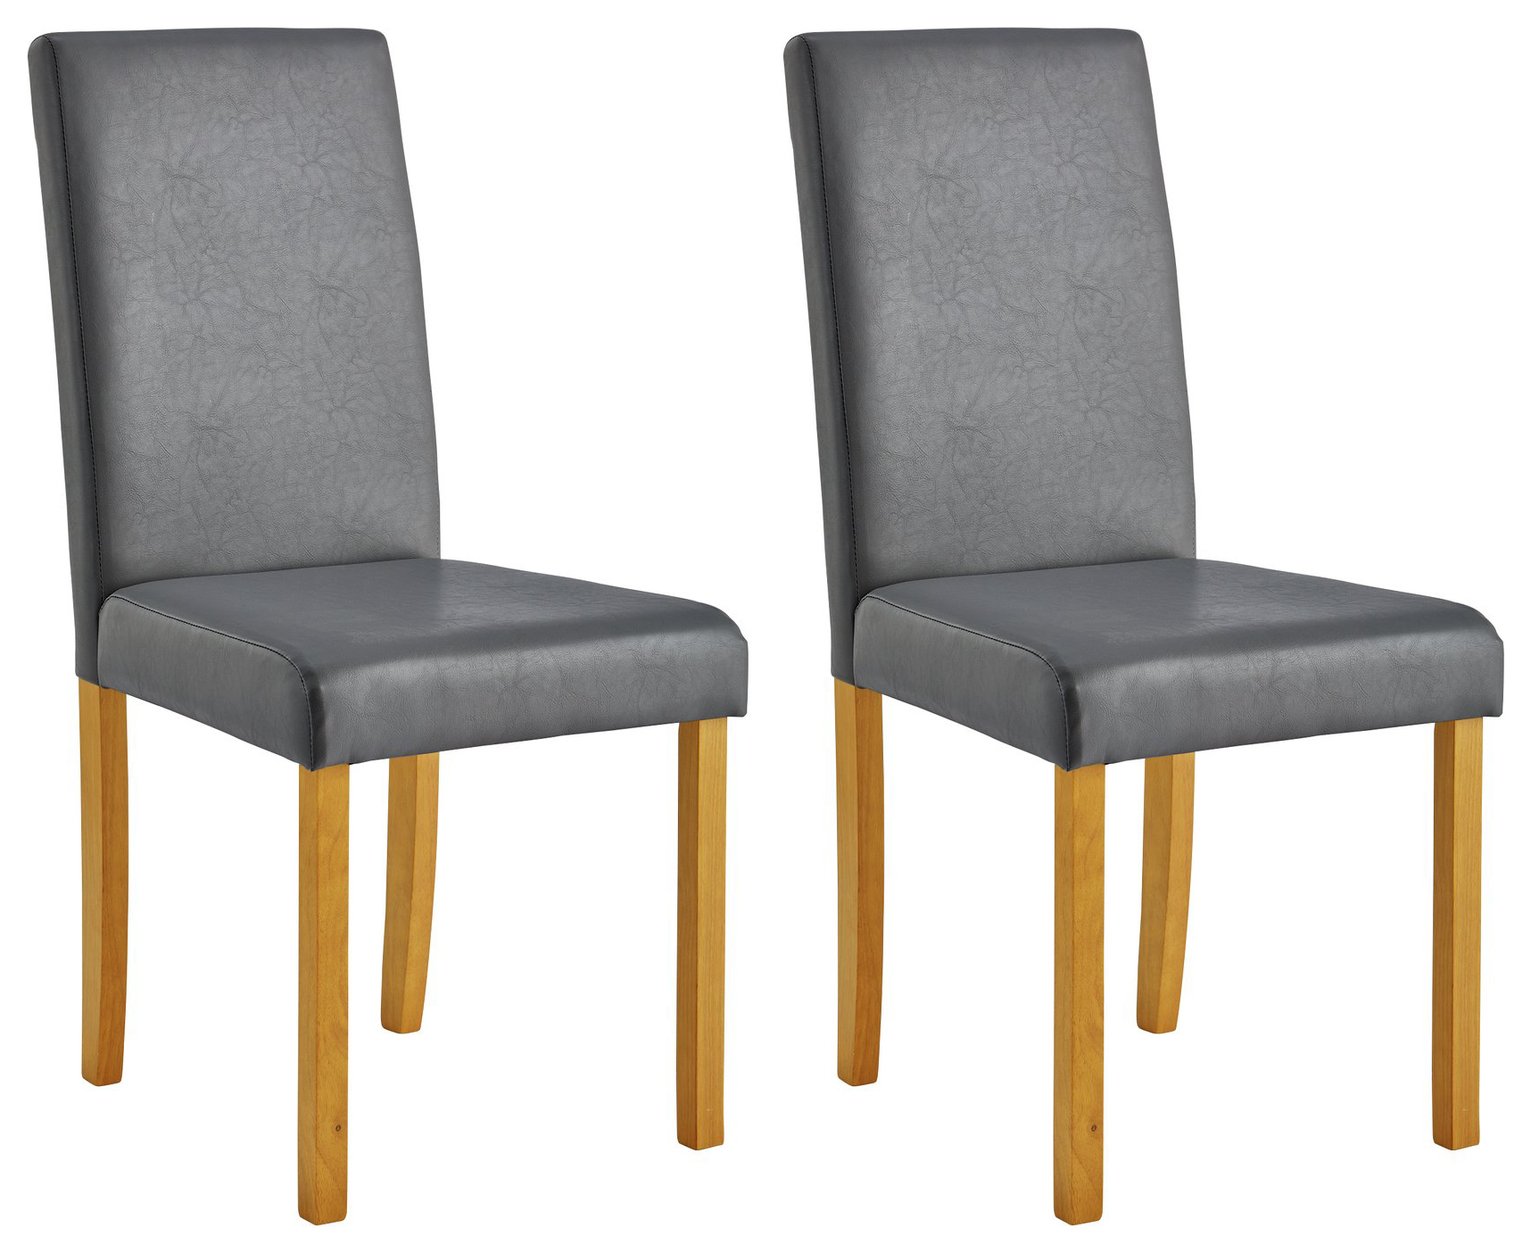 Argos Home Pair of Leather Effect Midback Chairs review